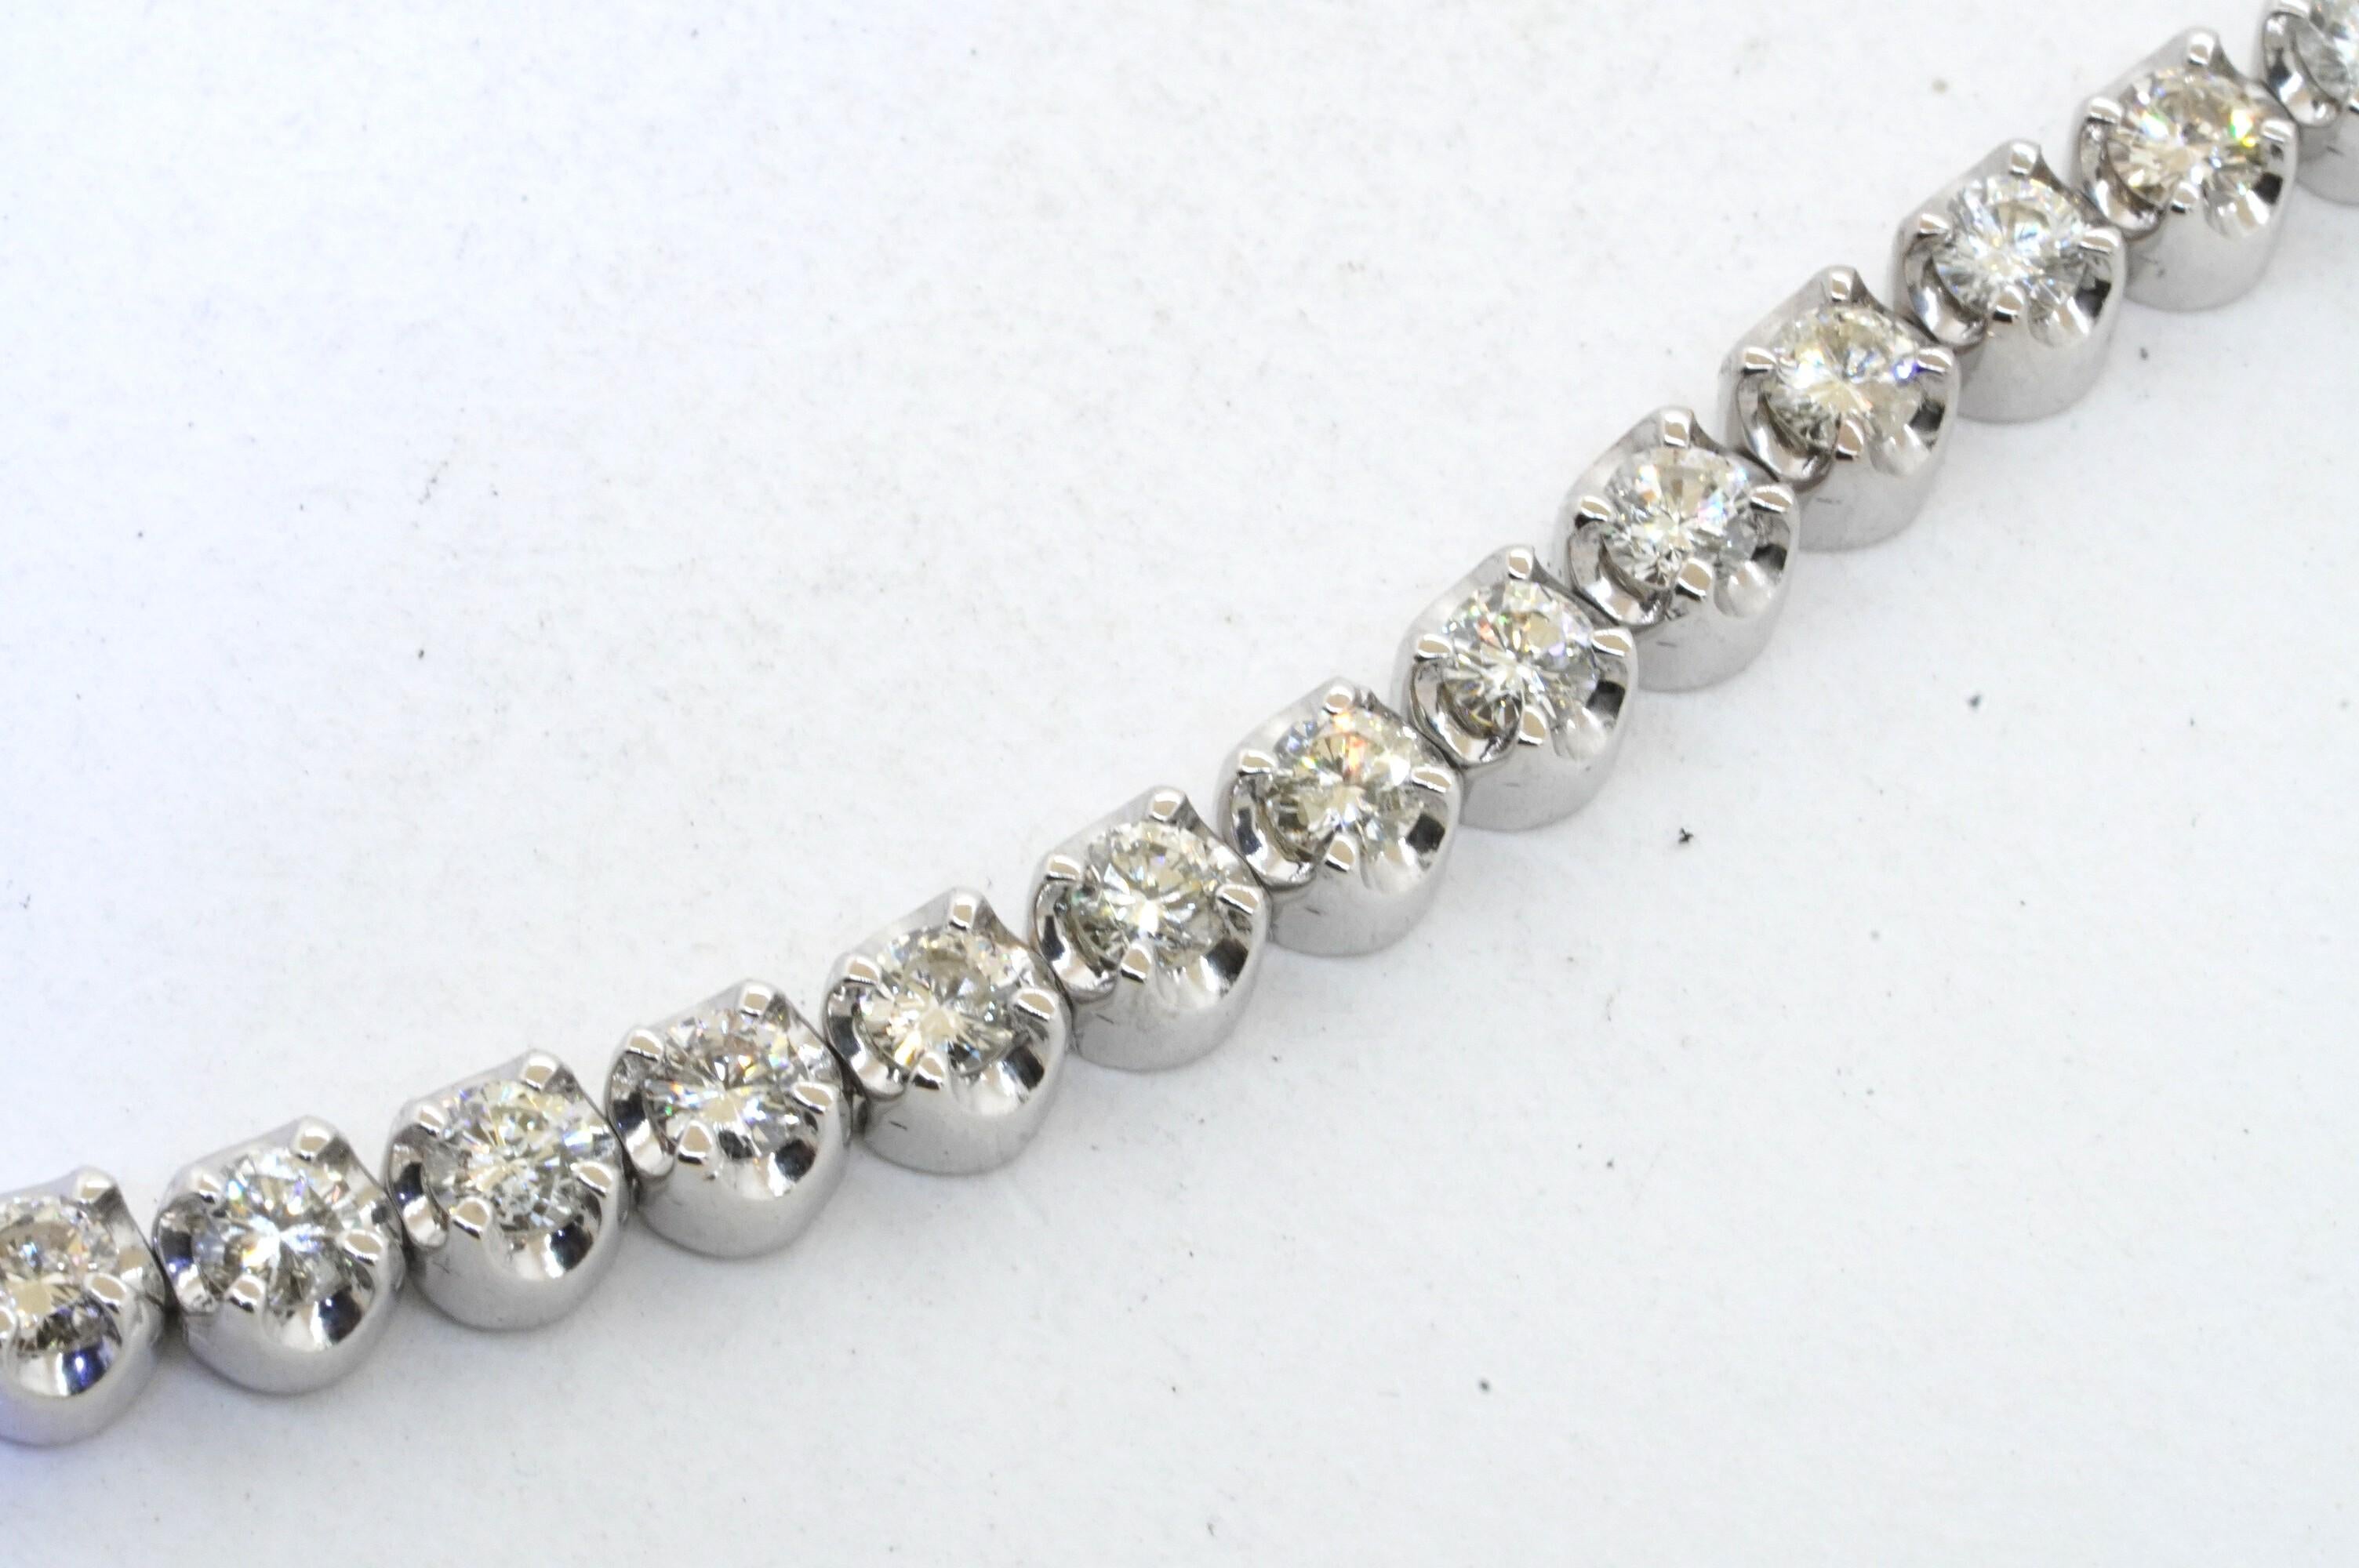 Heavy 14K White Gold High Fashion 5.18CT VS Diamond Tennis Line Bracelet In Excellent Condition For Sale In Fort Lauderdale, FL